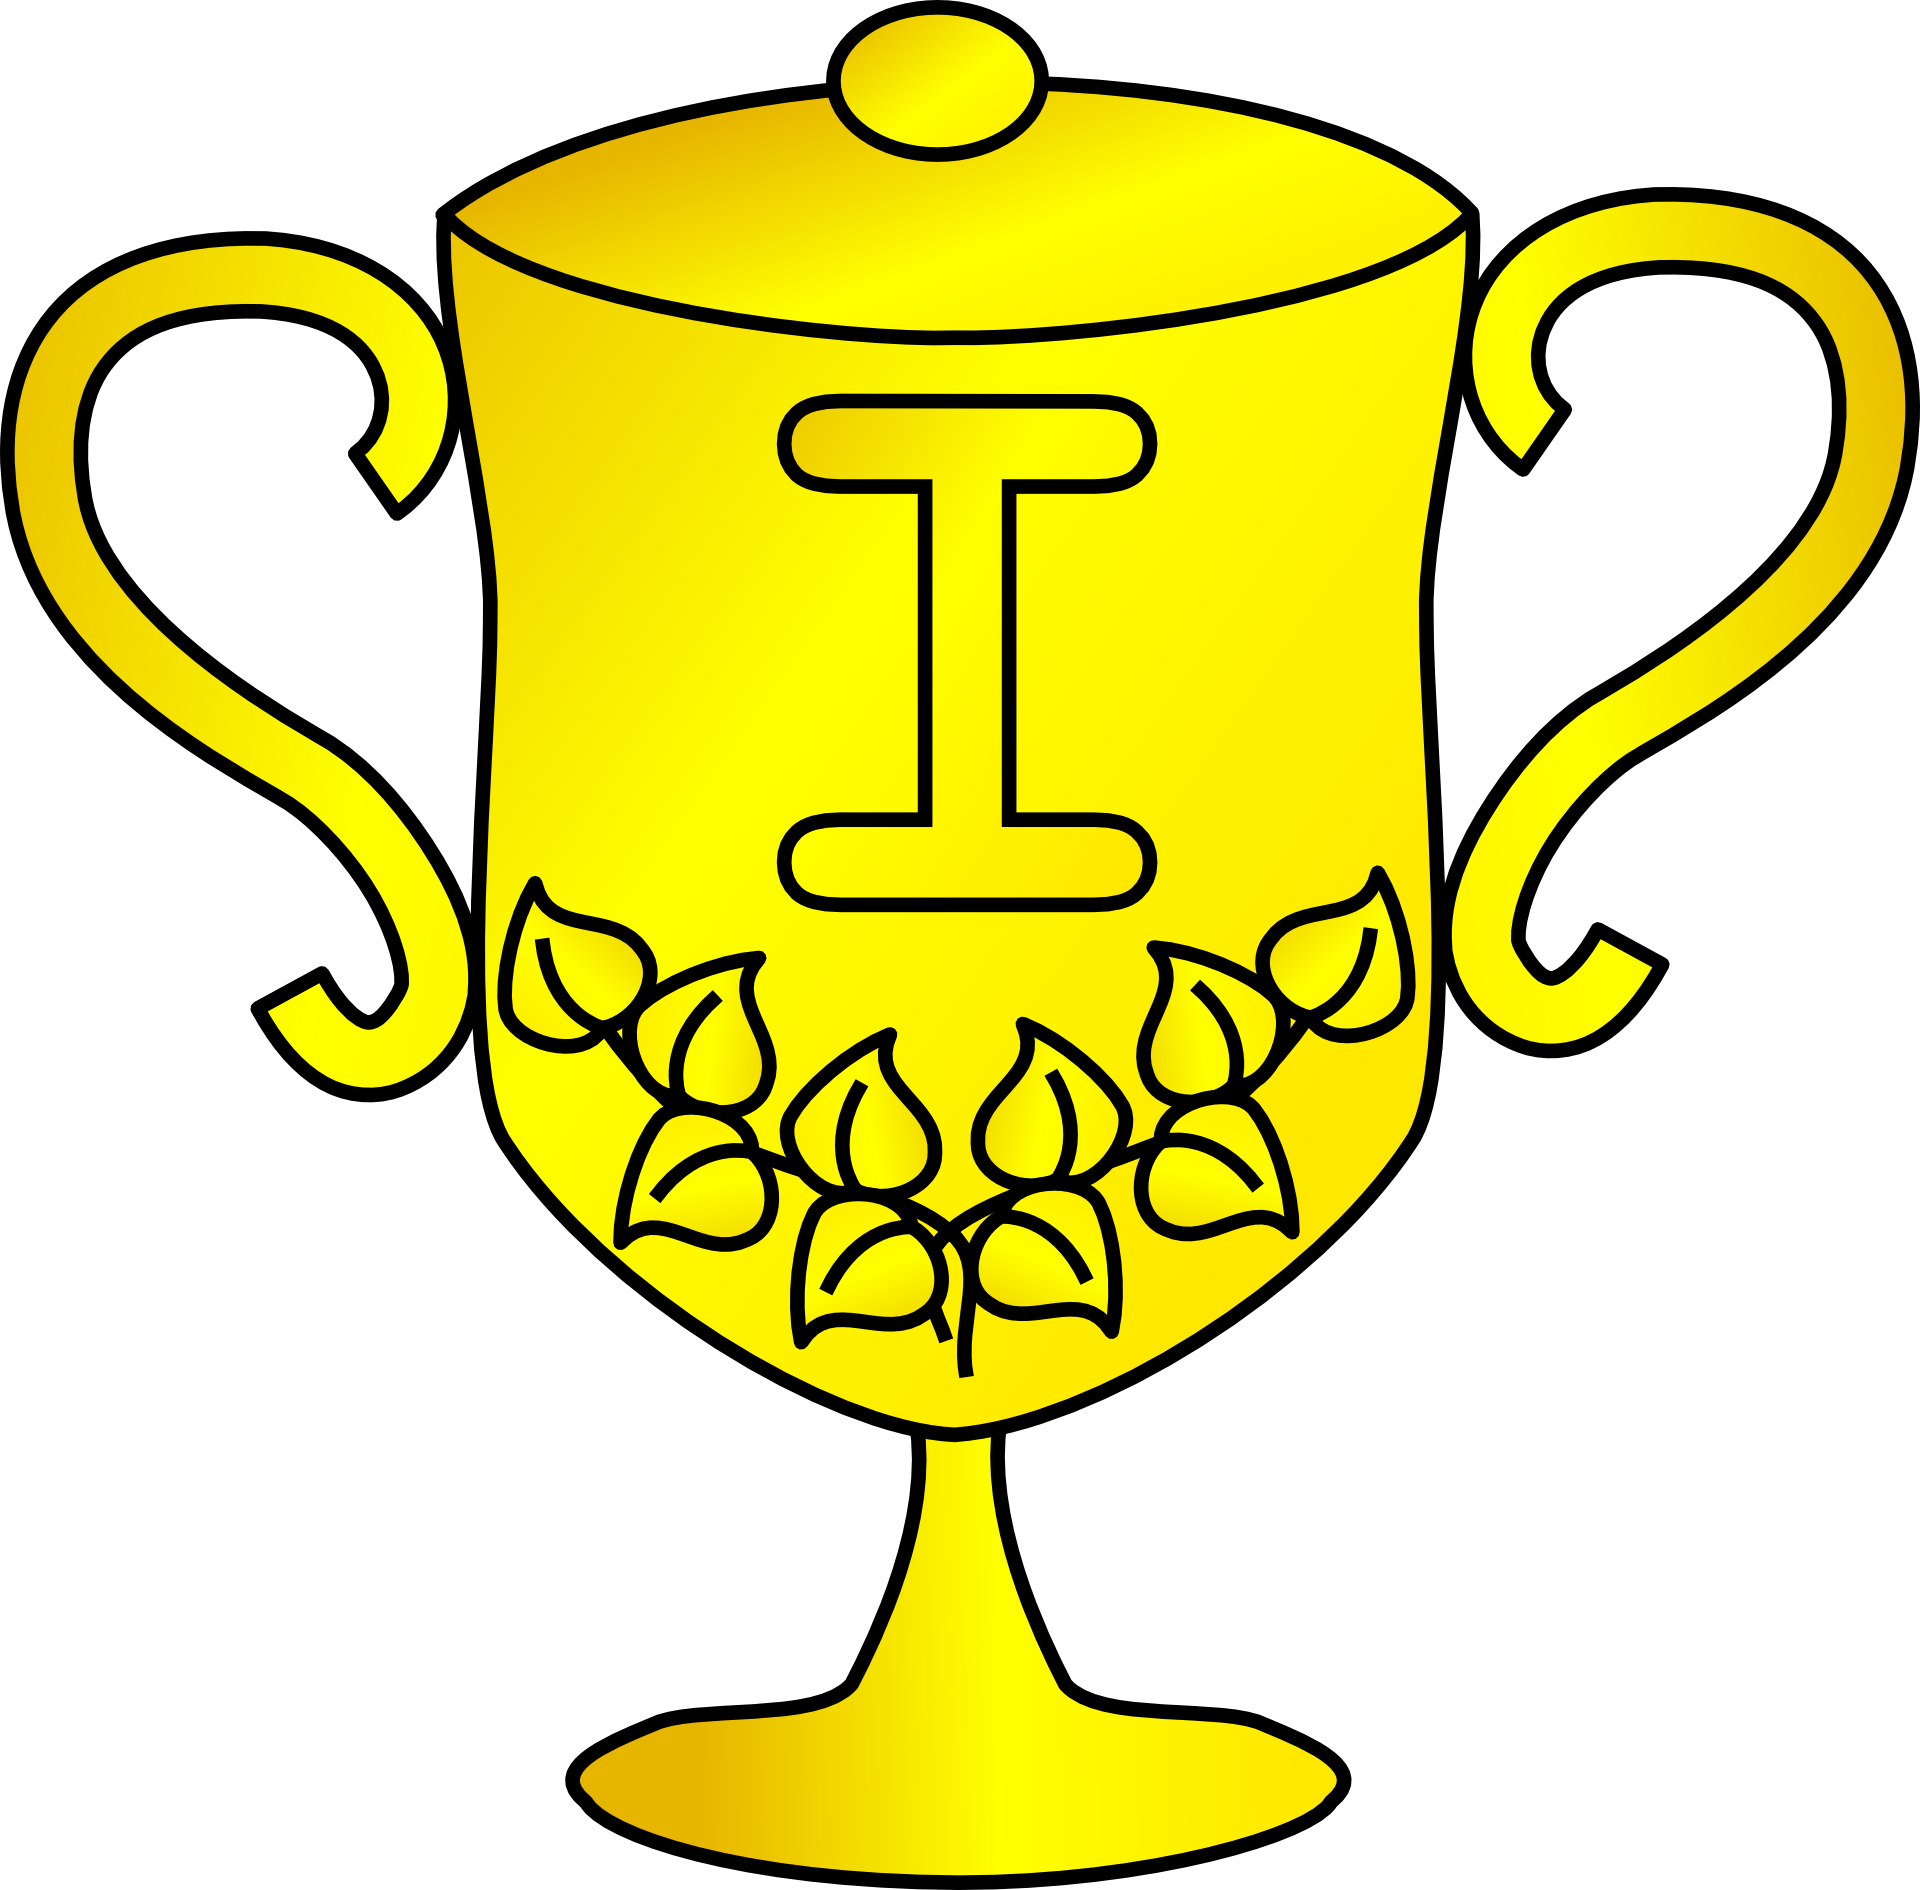 Golden winner cup drawing free image download